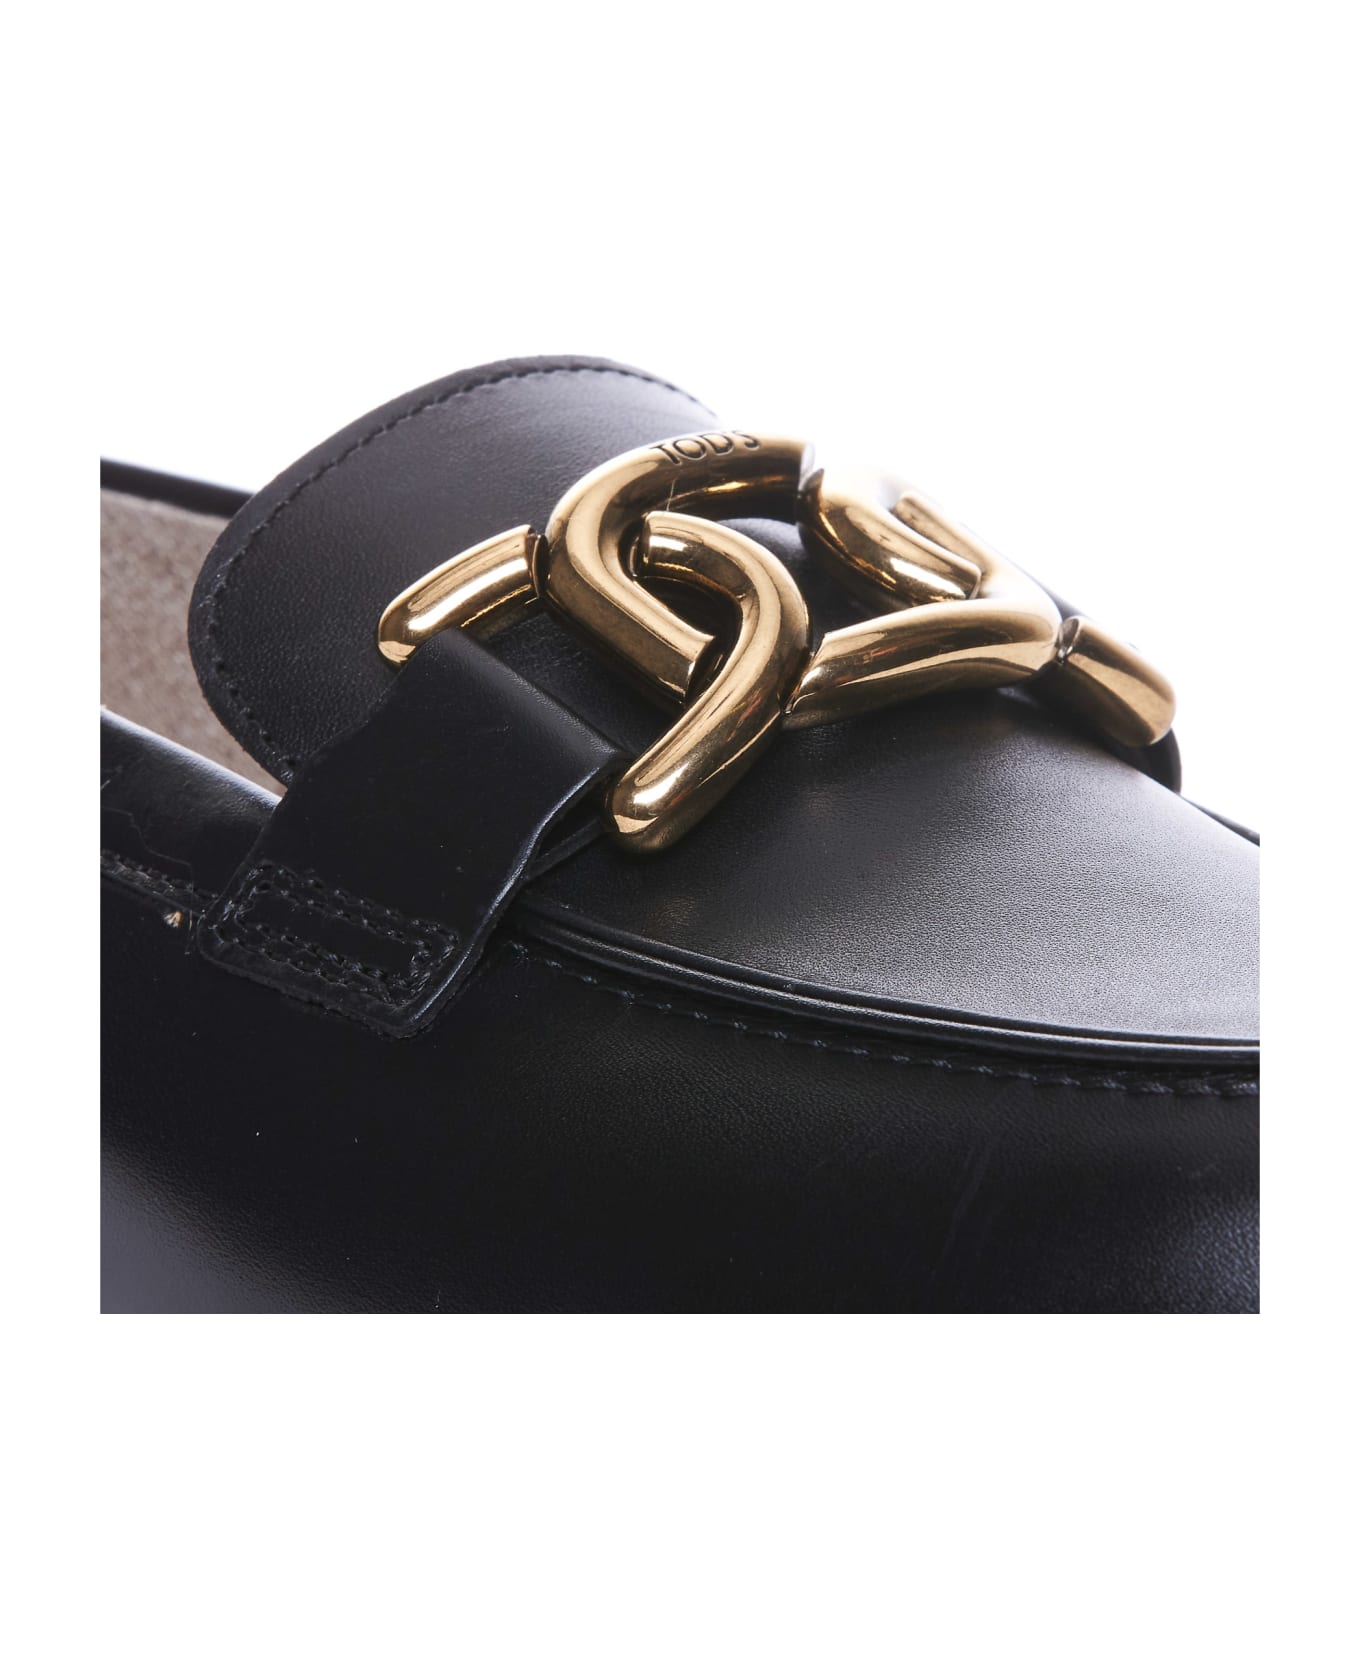 Tod's Kate Loafers - black